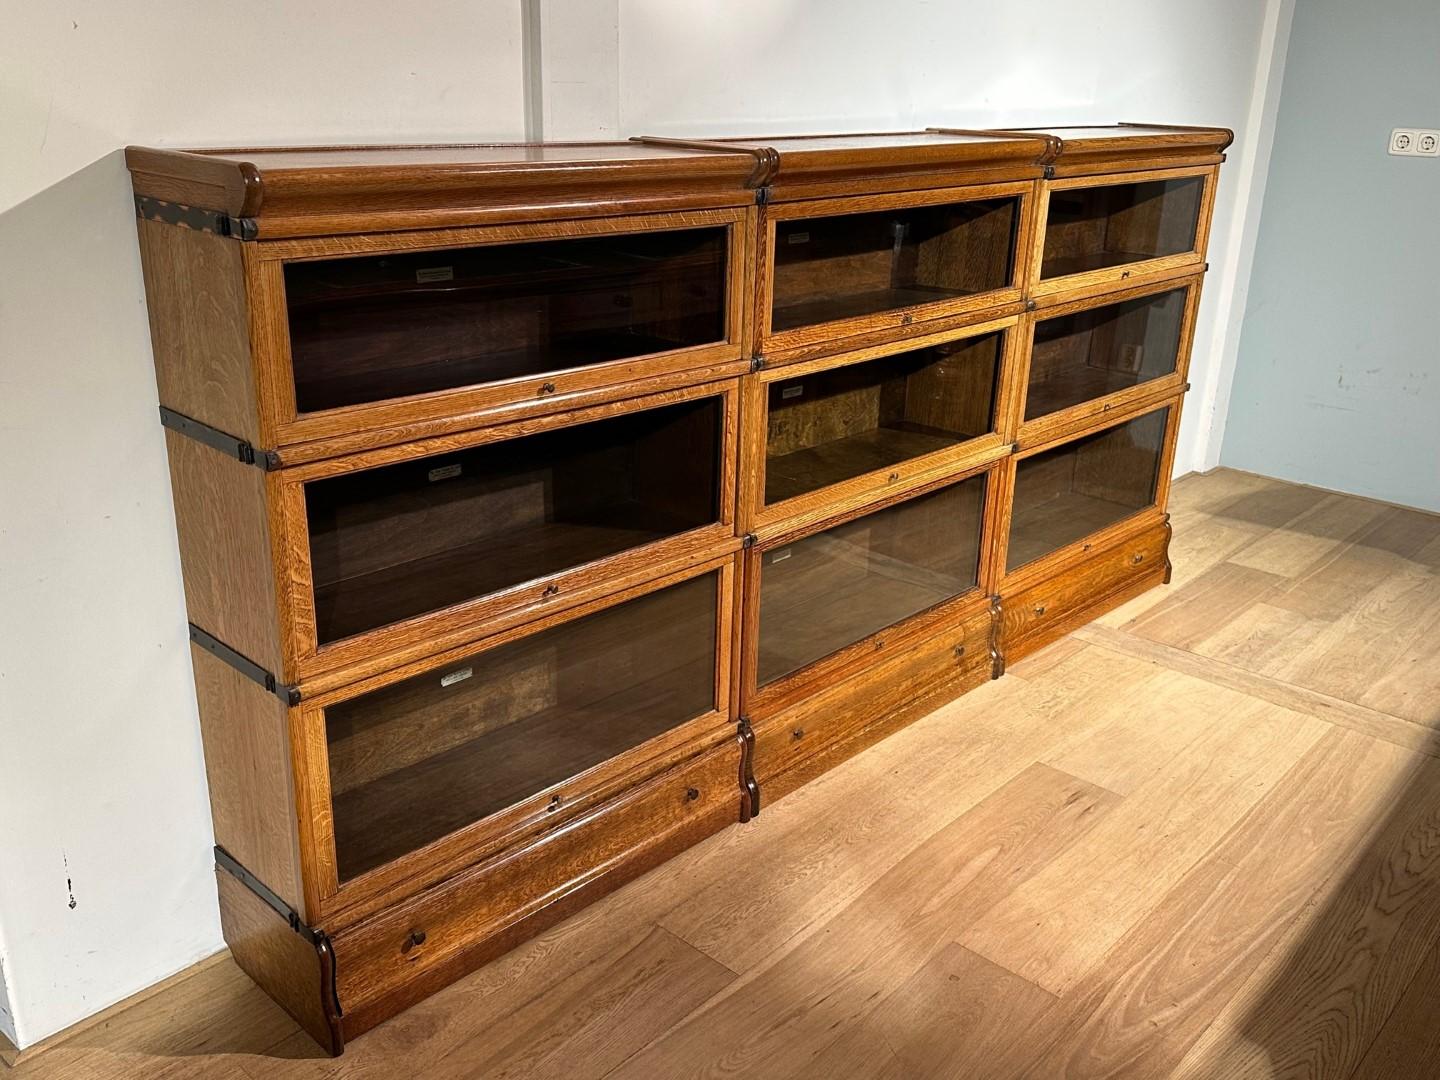 Beautiful antique oak Globe Wernicke bookcase in perfect condition. Cabinet consists of 9 stackable parts with 3 feet with drawers and 3 hoods. Beautiful warm light oak color.
Origin: England
Period: Approx. 1895-1910
Size: Br. 260cm x 29cm x